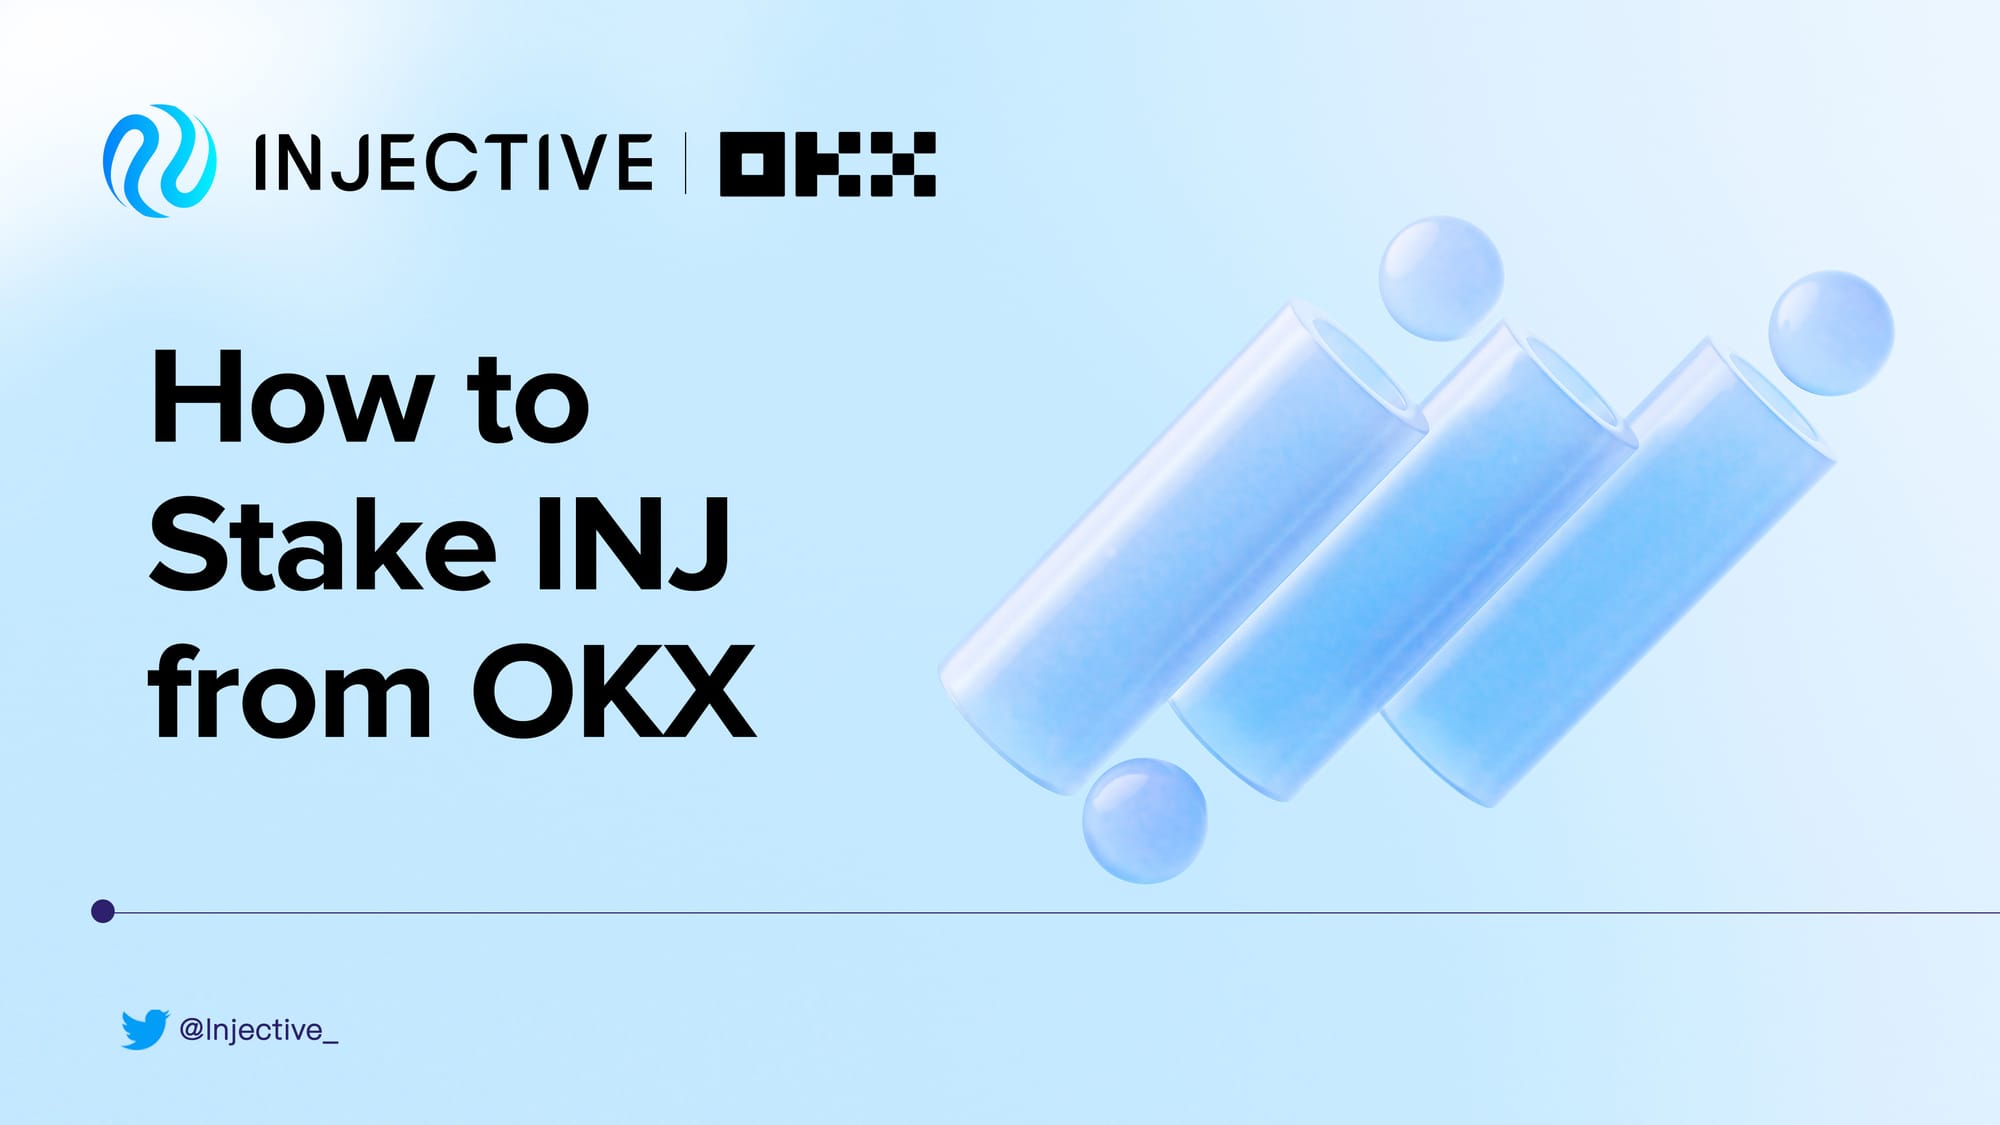 How to Stake INJ from OKX